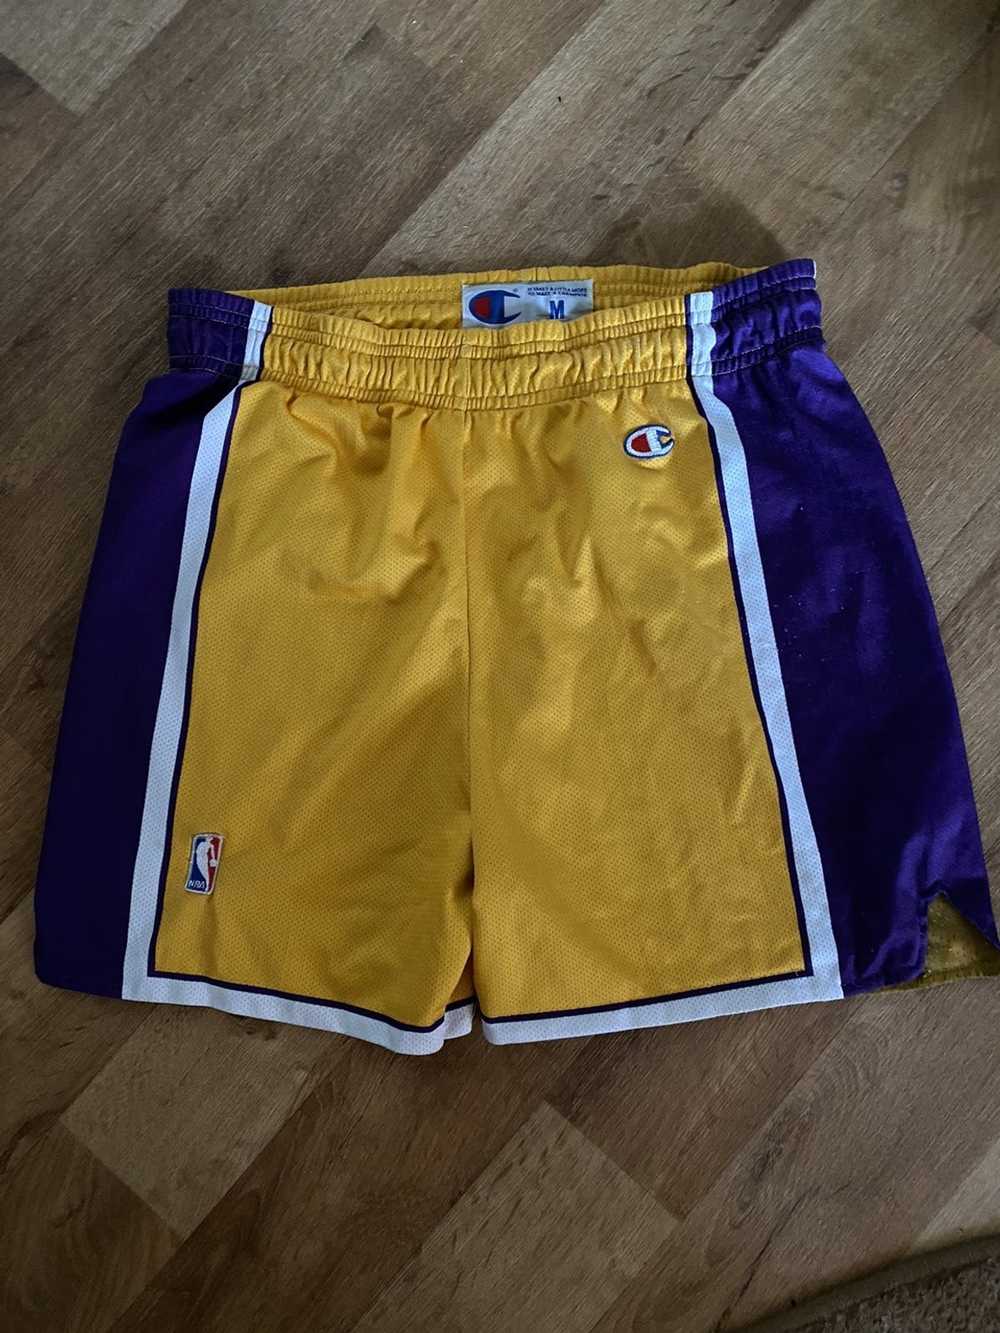 Los Angeles Lakers Vintage Champion NBA Shorts size Adult Small S